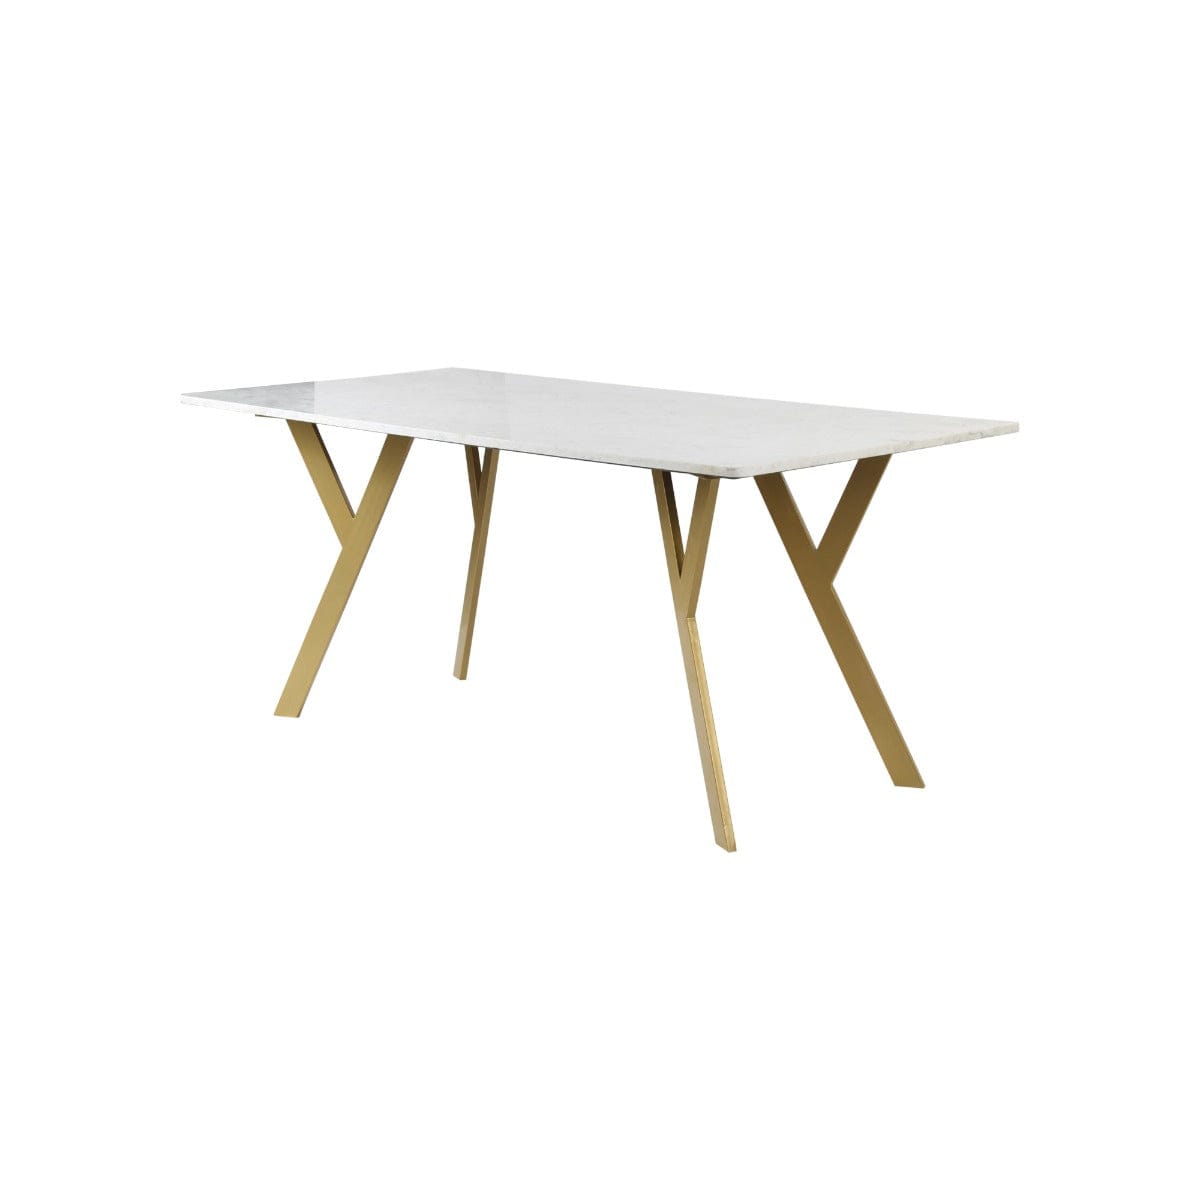 Kir 6 Seater Marble Dining Table Set In Gold Finish